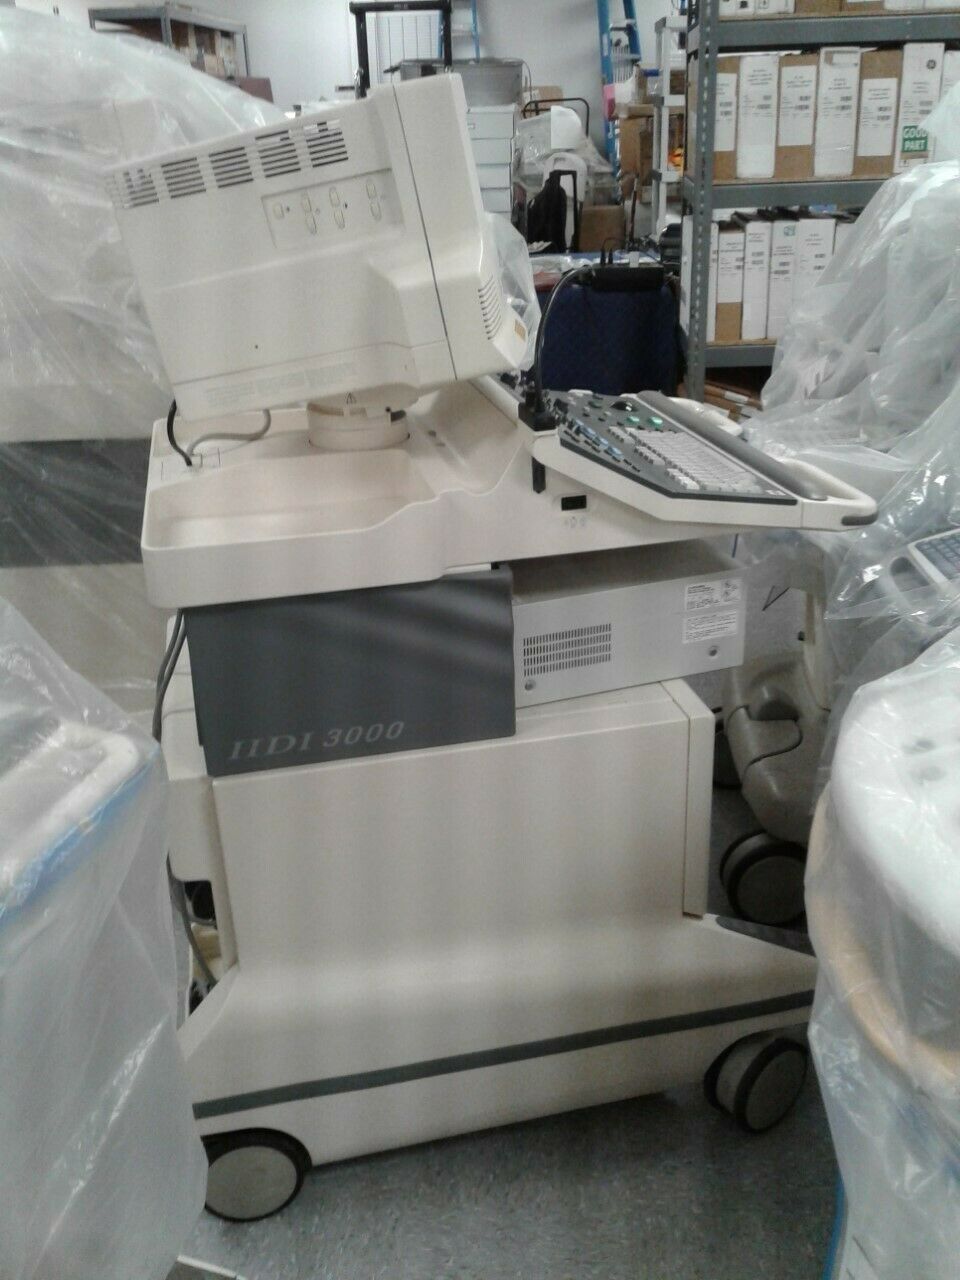 Philips ATL HDI  3000 Ultrasound Machine.  System passed diagnostics. Tested  DIAGNOSTIC ULTRASOUND MACHINES FOR SALE